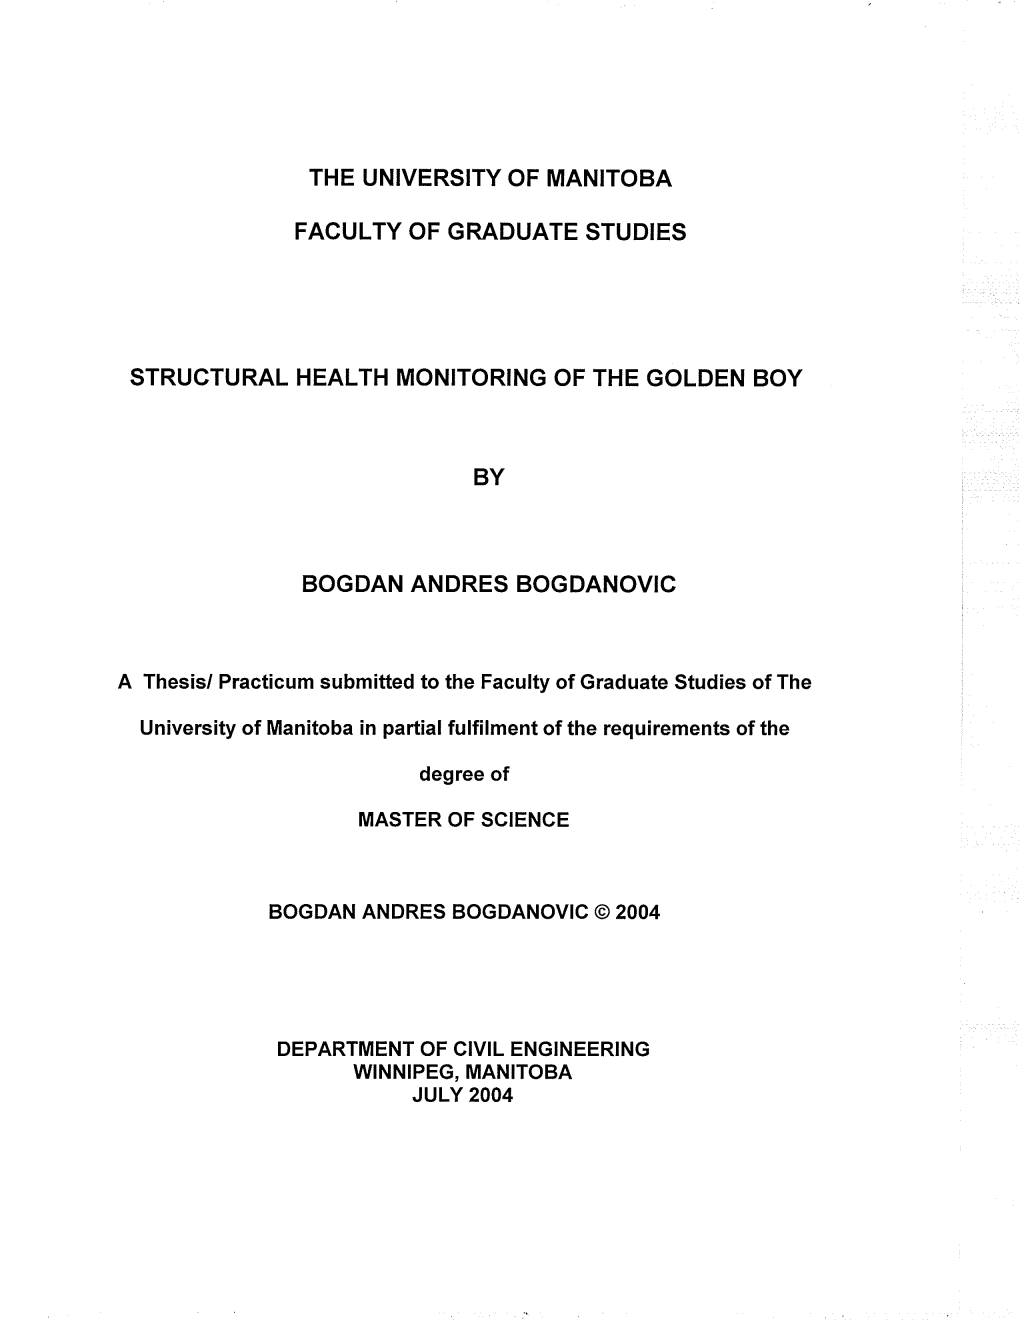 Faculty of Graduate Studies Structural Health Monitoring of the Golden Boy Bogdan Andres Bogdanovic